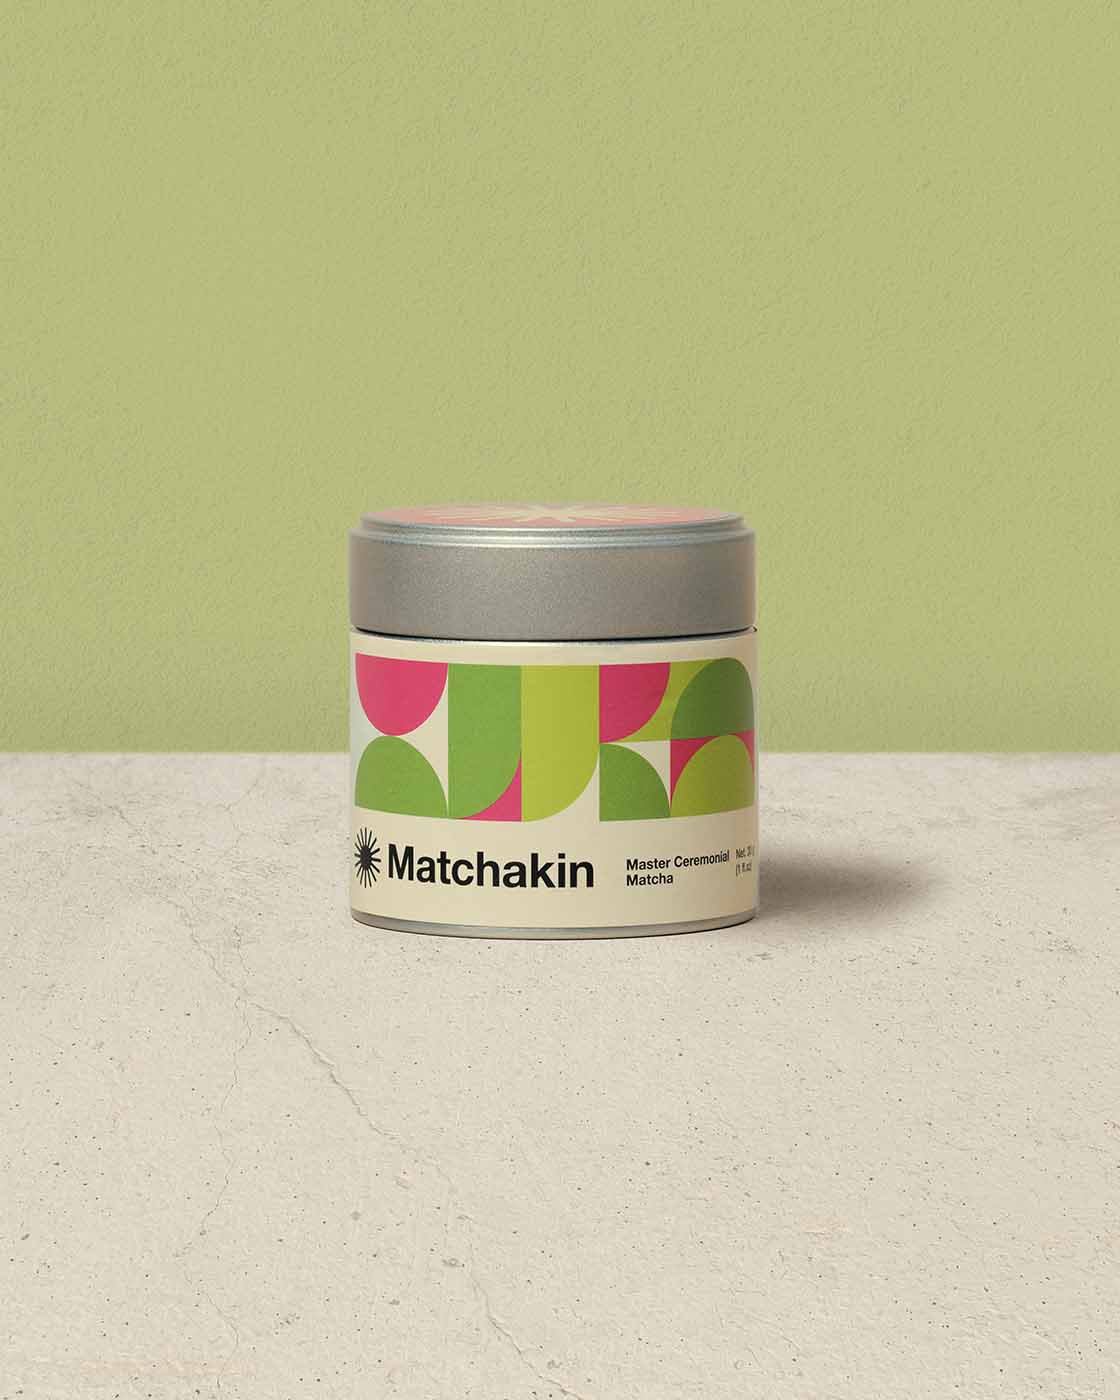 Master Ceremonial Matcha, made in Japan. An absolute gem of quality and taste, available only at Matchakin